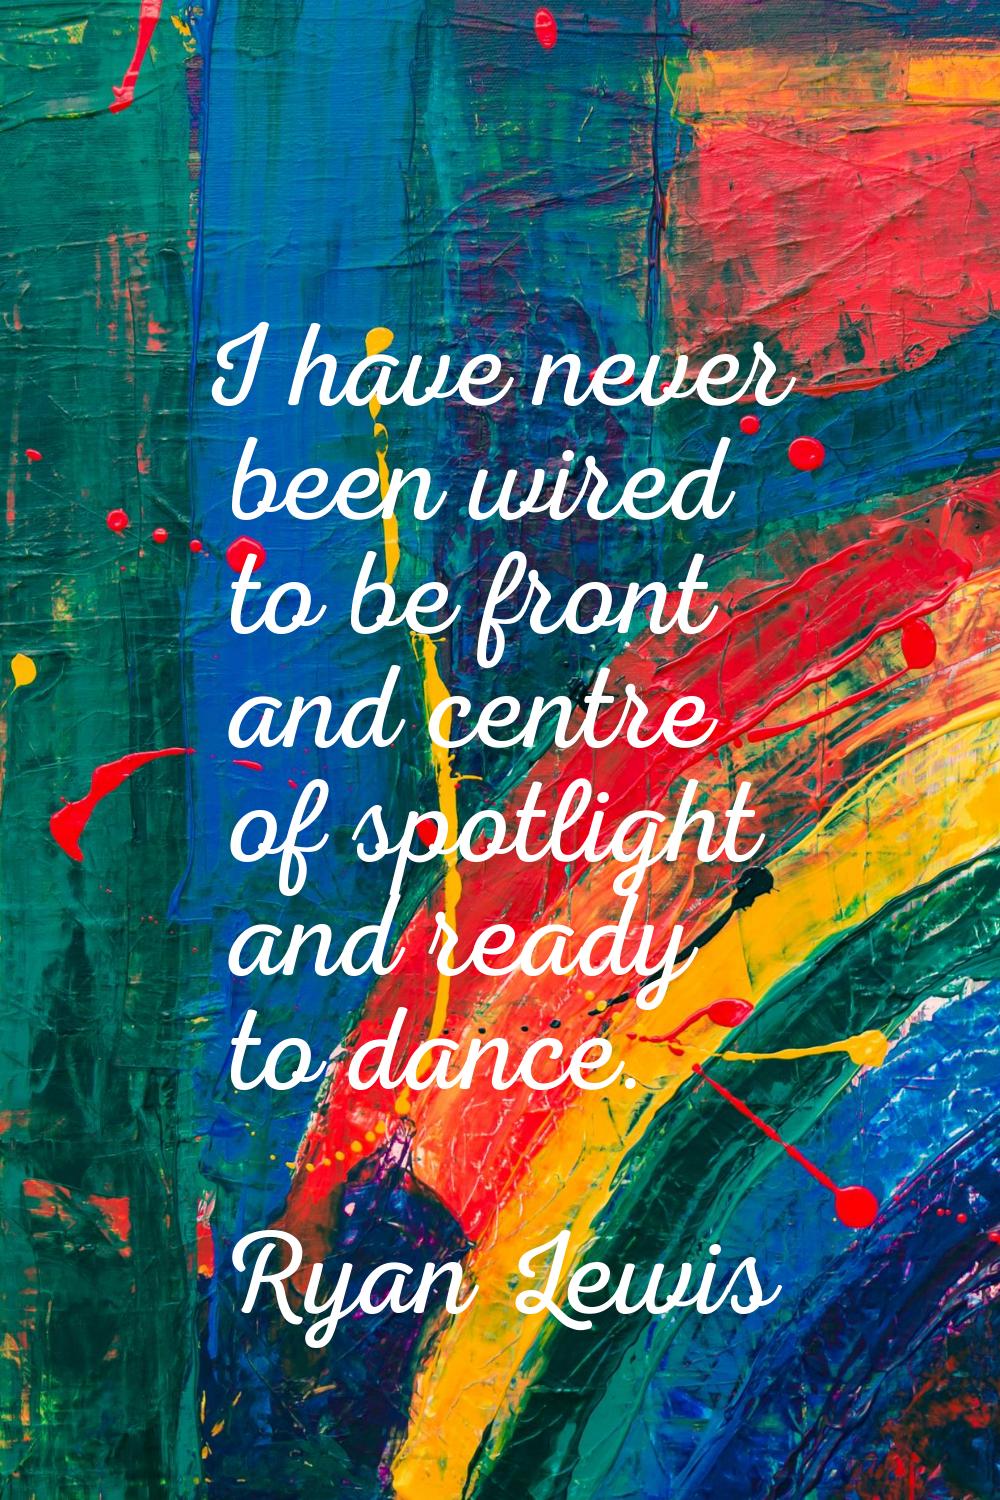 I have never been wired to be front and centre of spotlight and ready to dance.